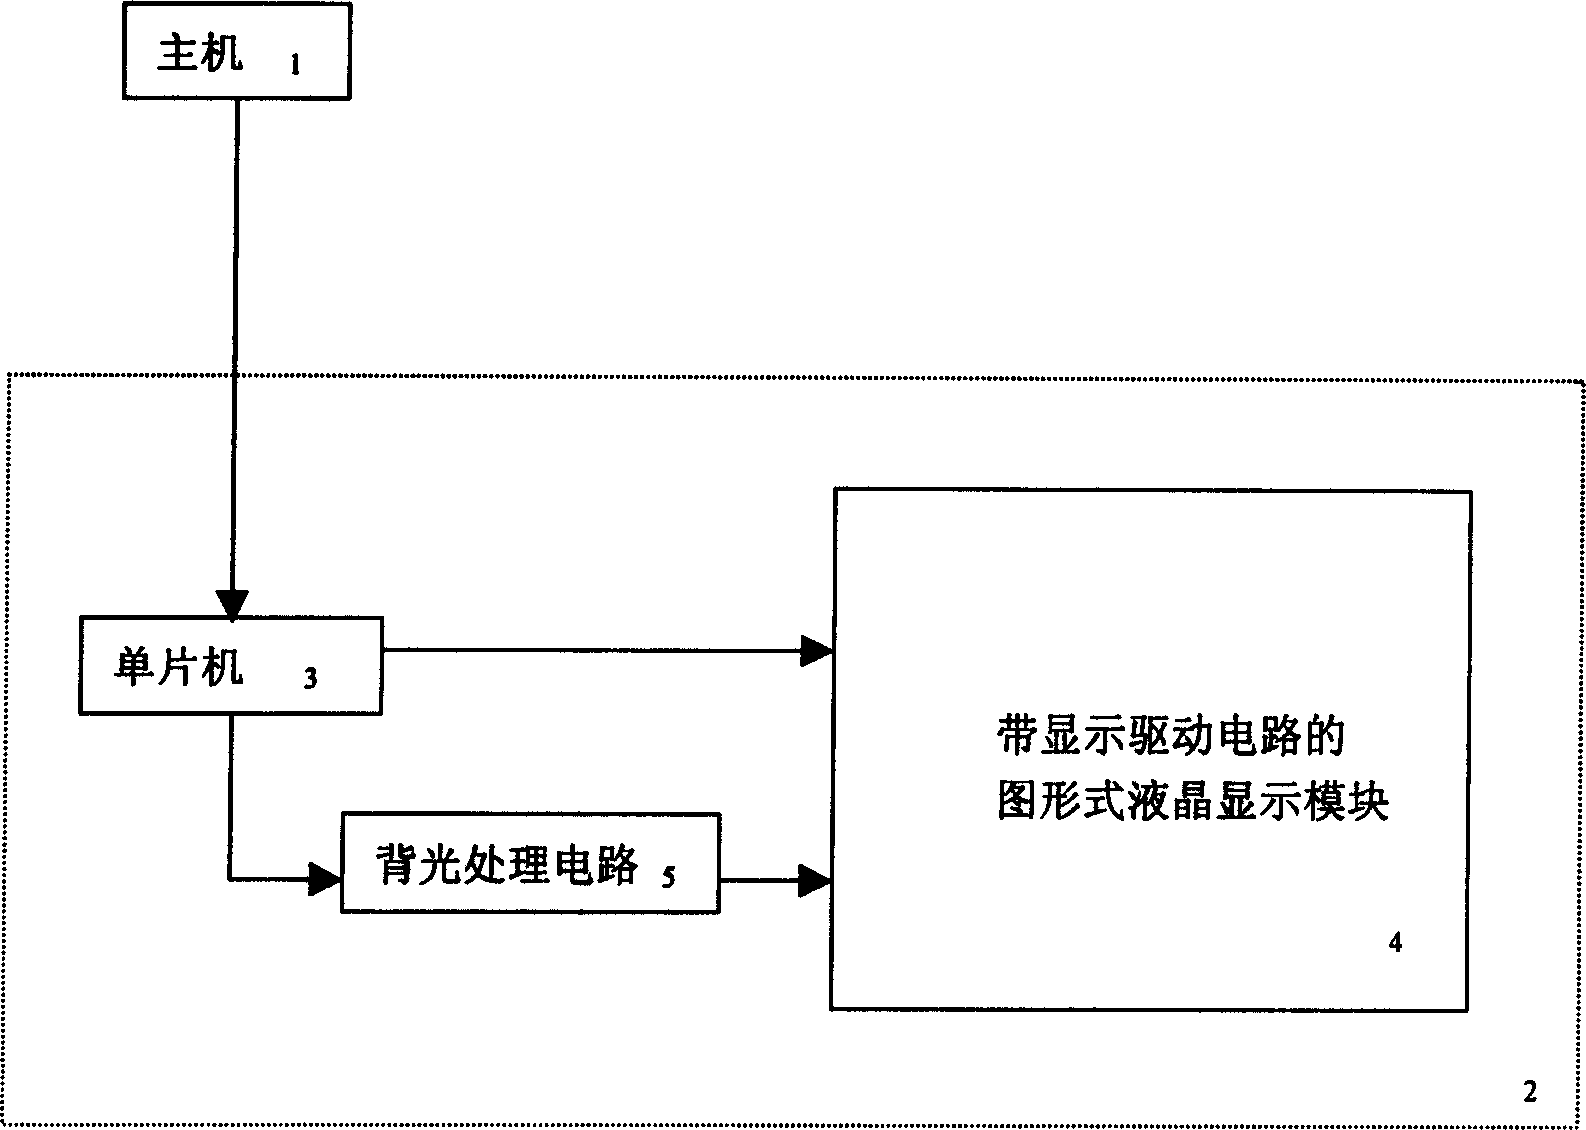 Currency count machine having external Chinese display and displaying method